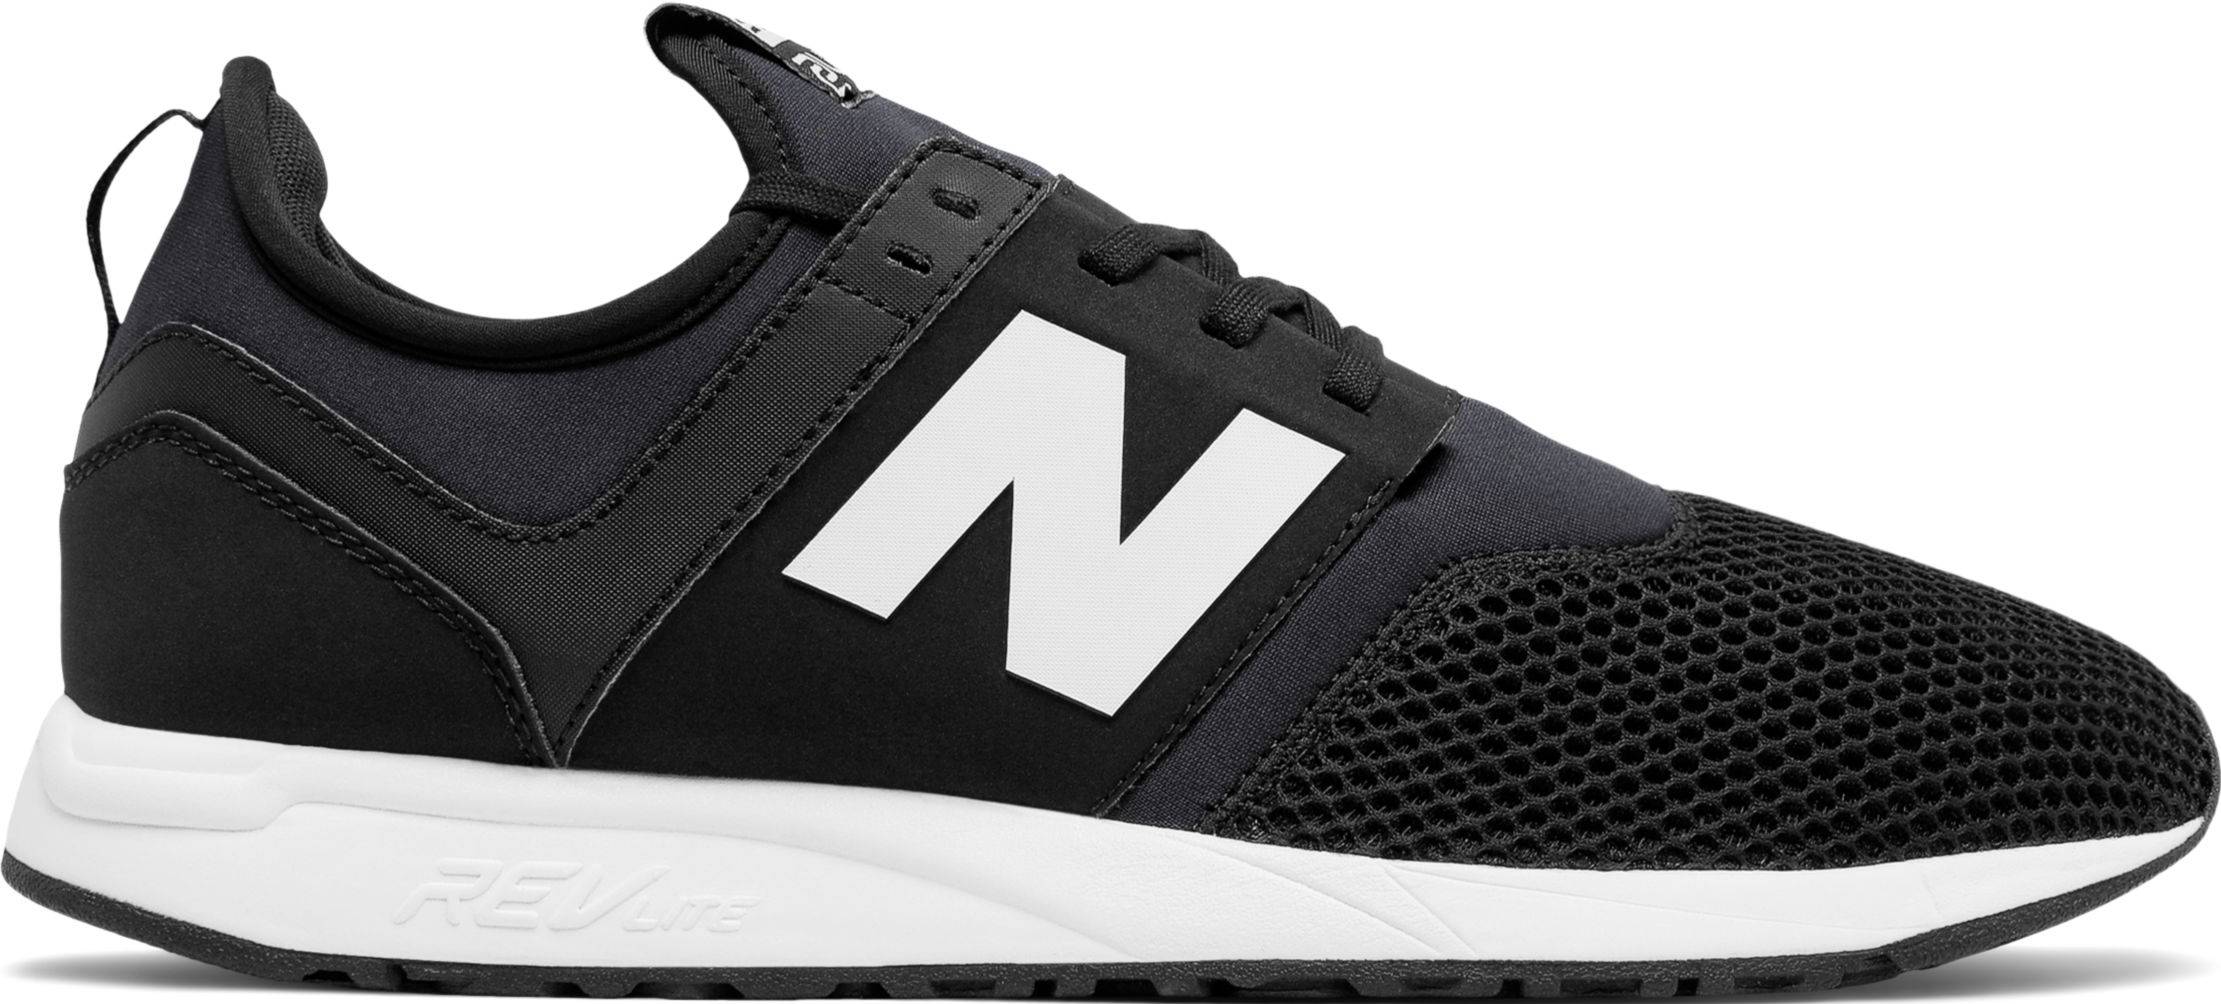 New Balance 247 Classic sneakers in 3 colors (only $57) | RunRepeat